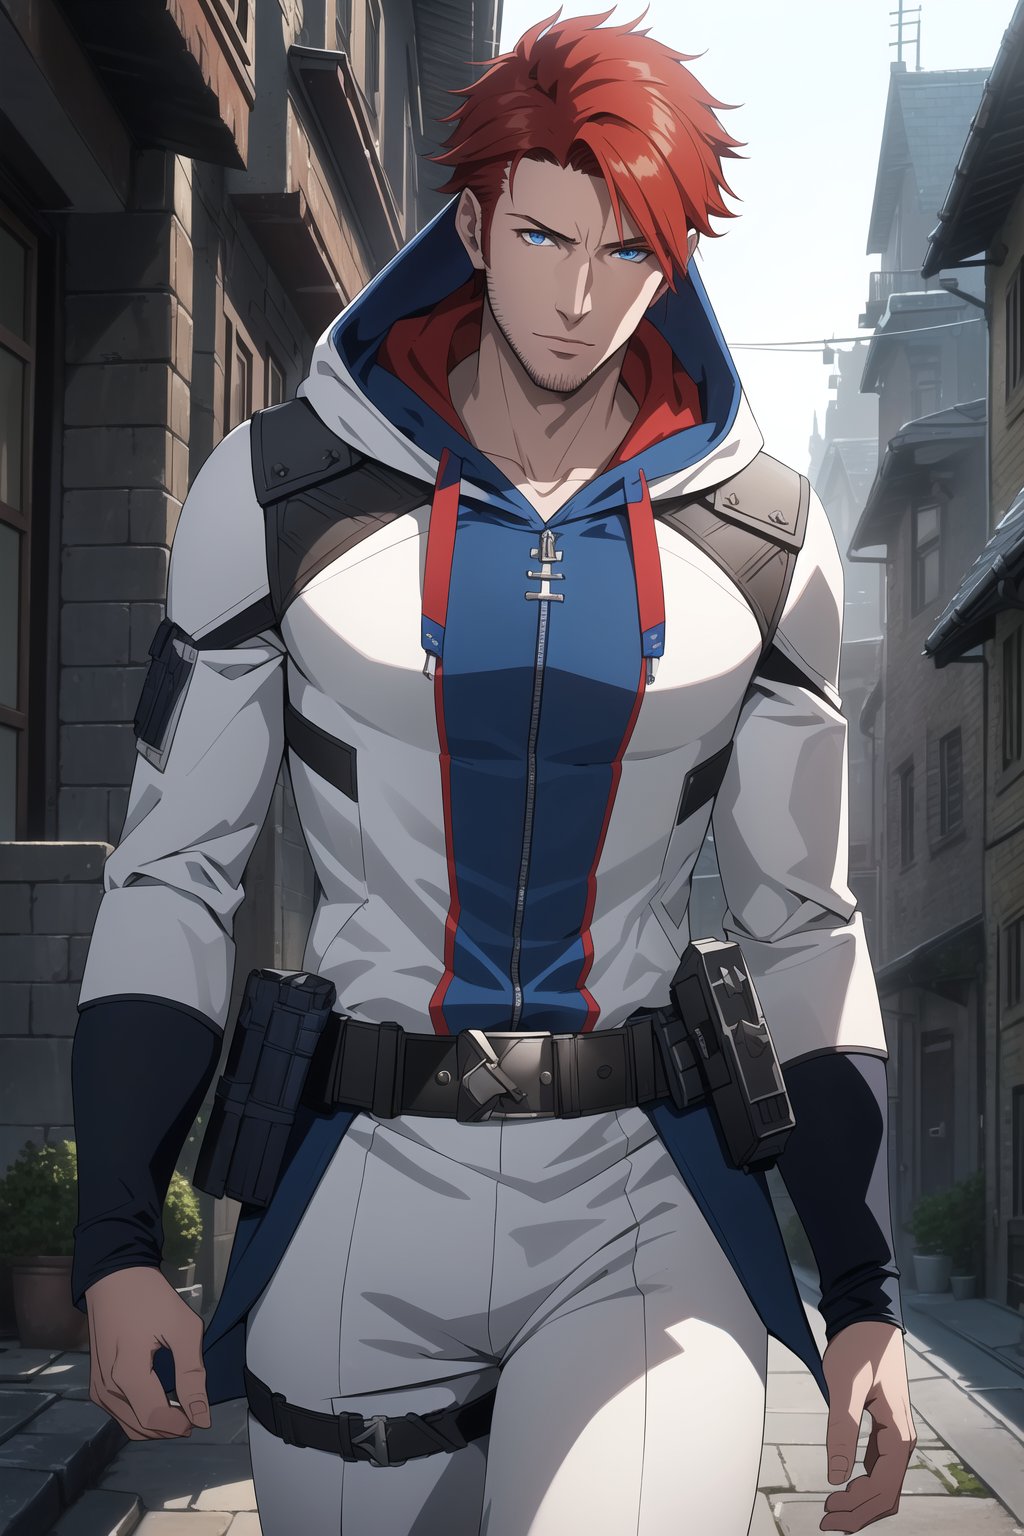 (Masterpiece, Best Quality),  (A Handsome 25-Year-Old British Male Werewolf Hunter), (Spiky Short Red Hair:1.2), (Pale Skin), (Blue Eyes), (Wearing White and Blue Tactical Assassin Outfit with Hood:1.4), (Modern City Road at Noon:1.2), (Walking Pose:1.4), Centered, (Half Body Shot:1.4), (From Front Shot:1.4), Insane Details, Intricate Face Detail, Intricate Hand Details, Cinematic Shot and Lighting, Realistic and Vibrant Colors, Sharp Focus, Ultra Detailed, Realistic Images, Depth of Field, Incredibly Realistic Environment and Scene, Master Composition and Cinematography,castlevania style